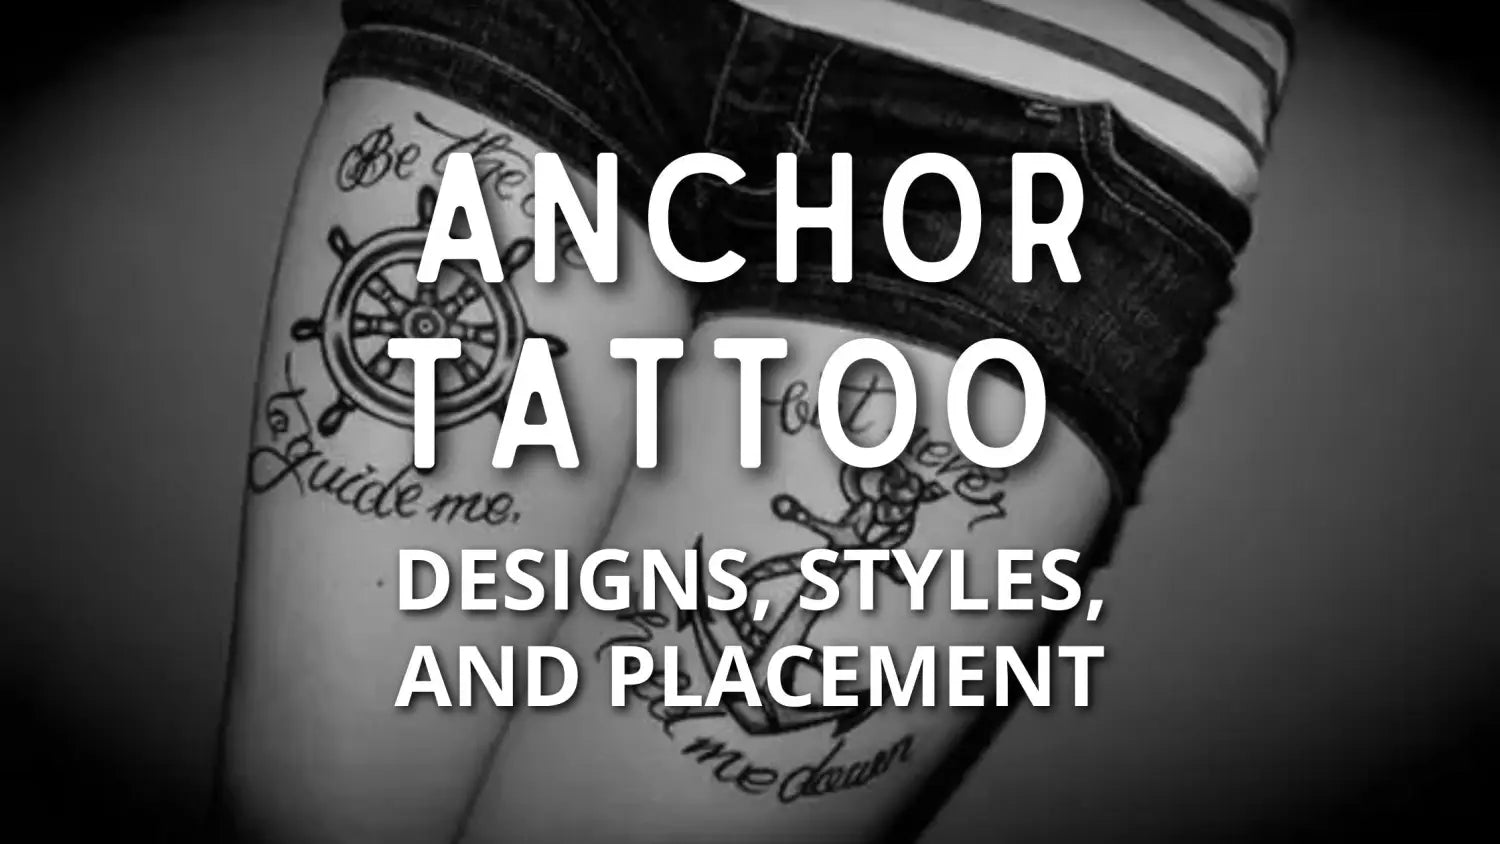 anchored in christ tattoo